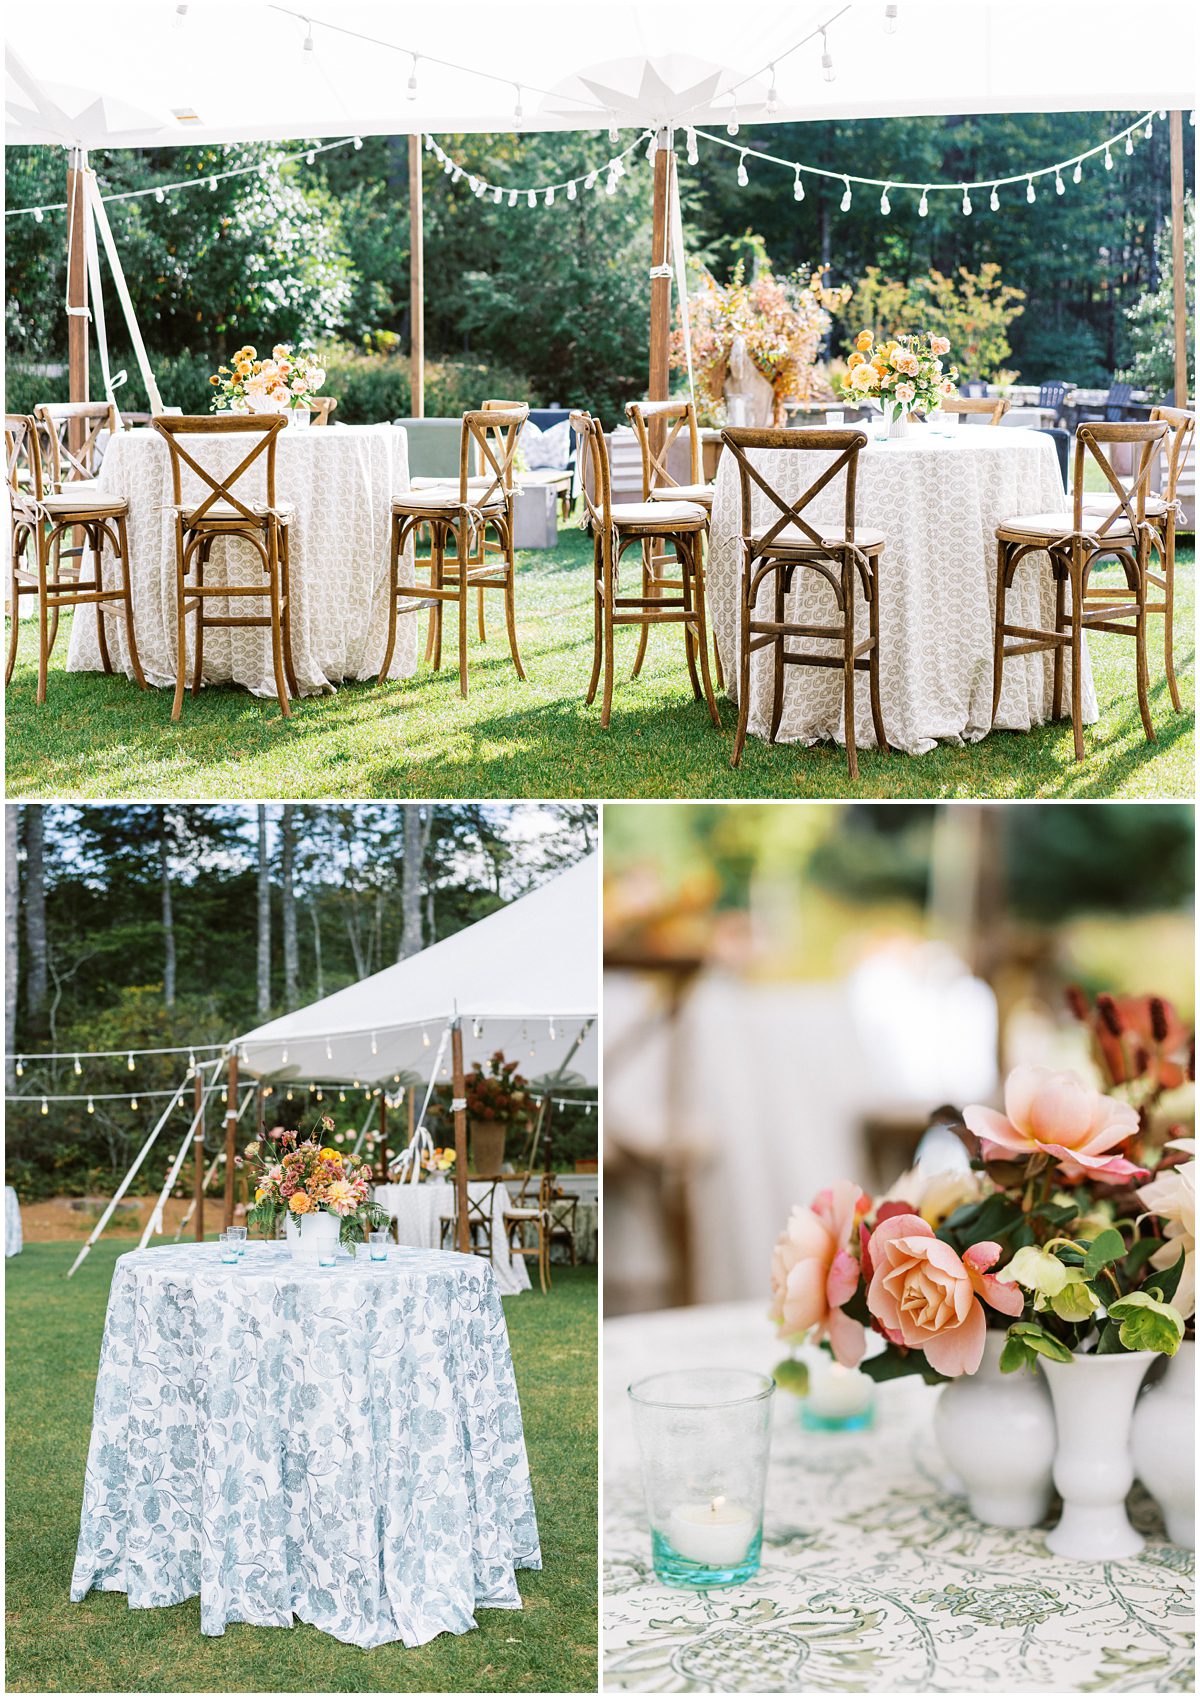 Luxurious tented wedding reception design for a fall wedding in the North Carolina mountains at a private estate